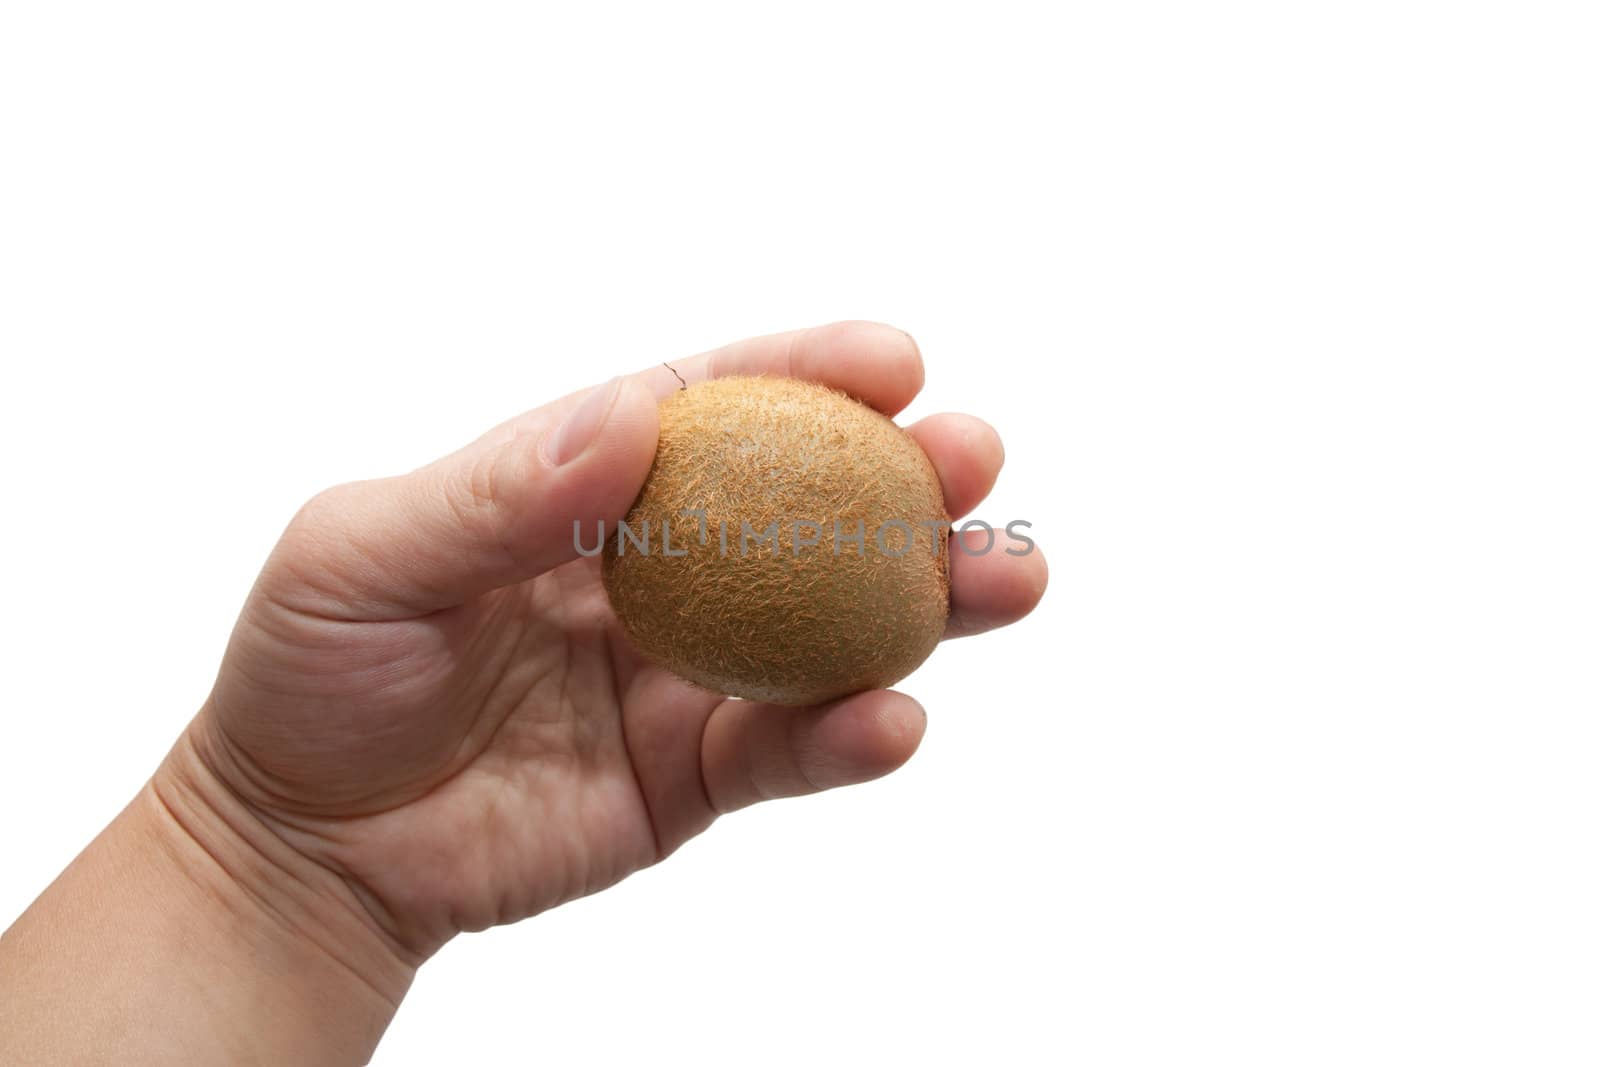 kiwi fruit in his hand on a white background by schankz